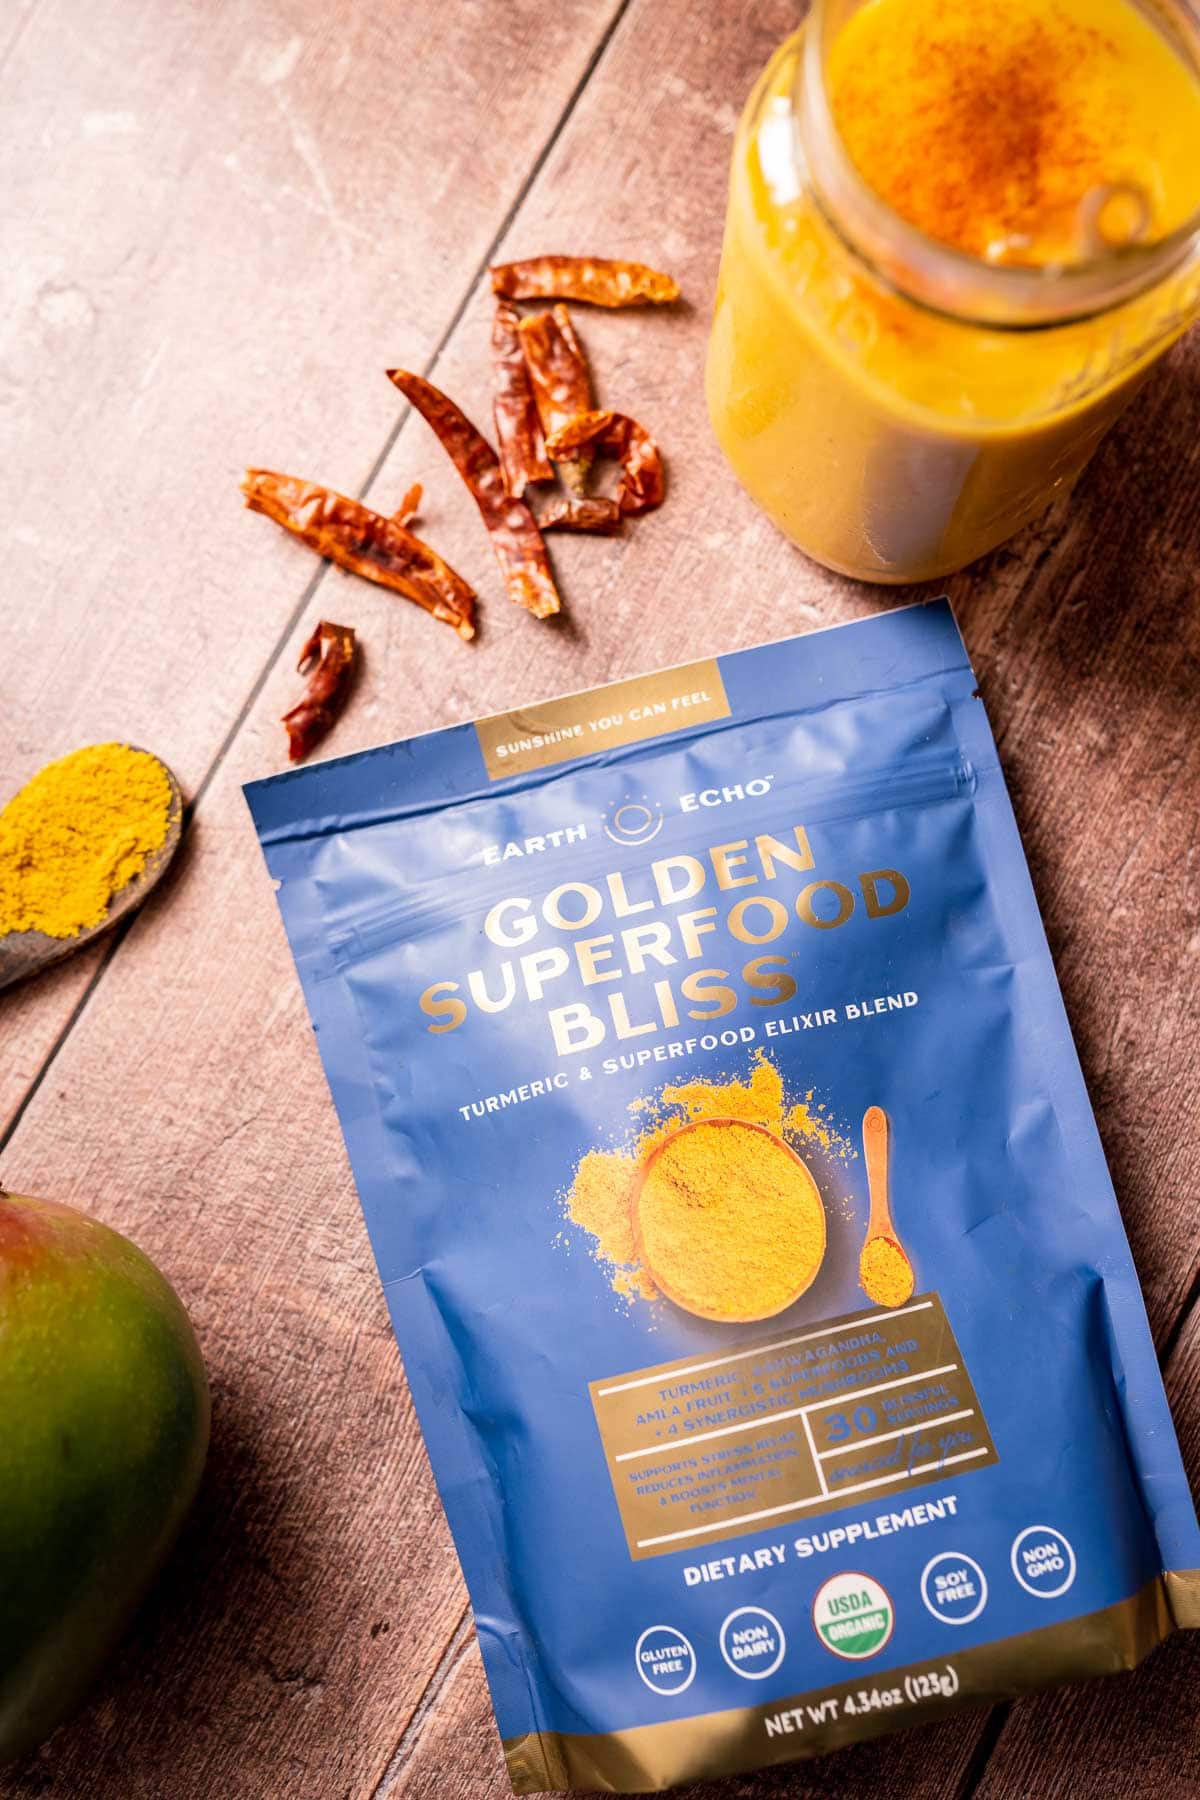 A blue bag of Earth Echo Golden Superfood Bliss resting on a wooden table alongside other ingredients.